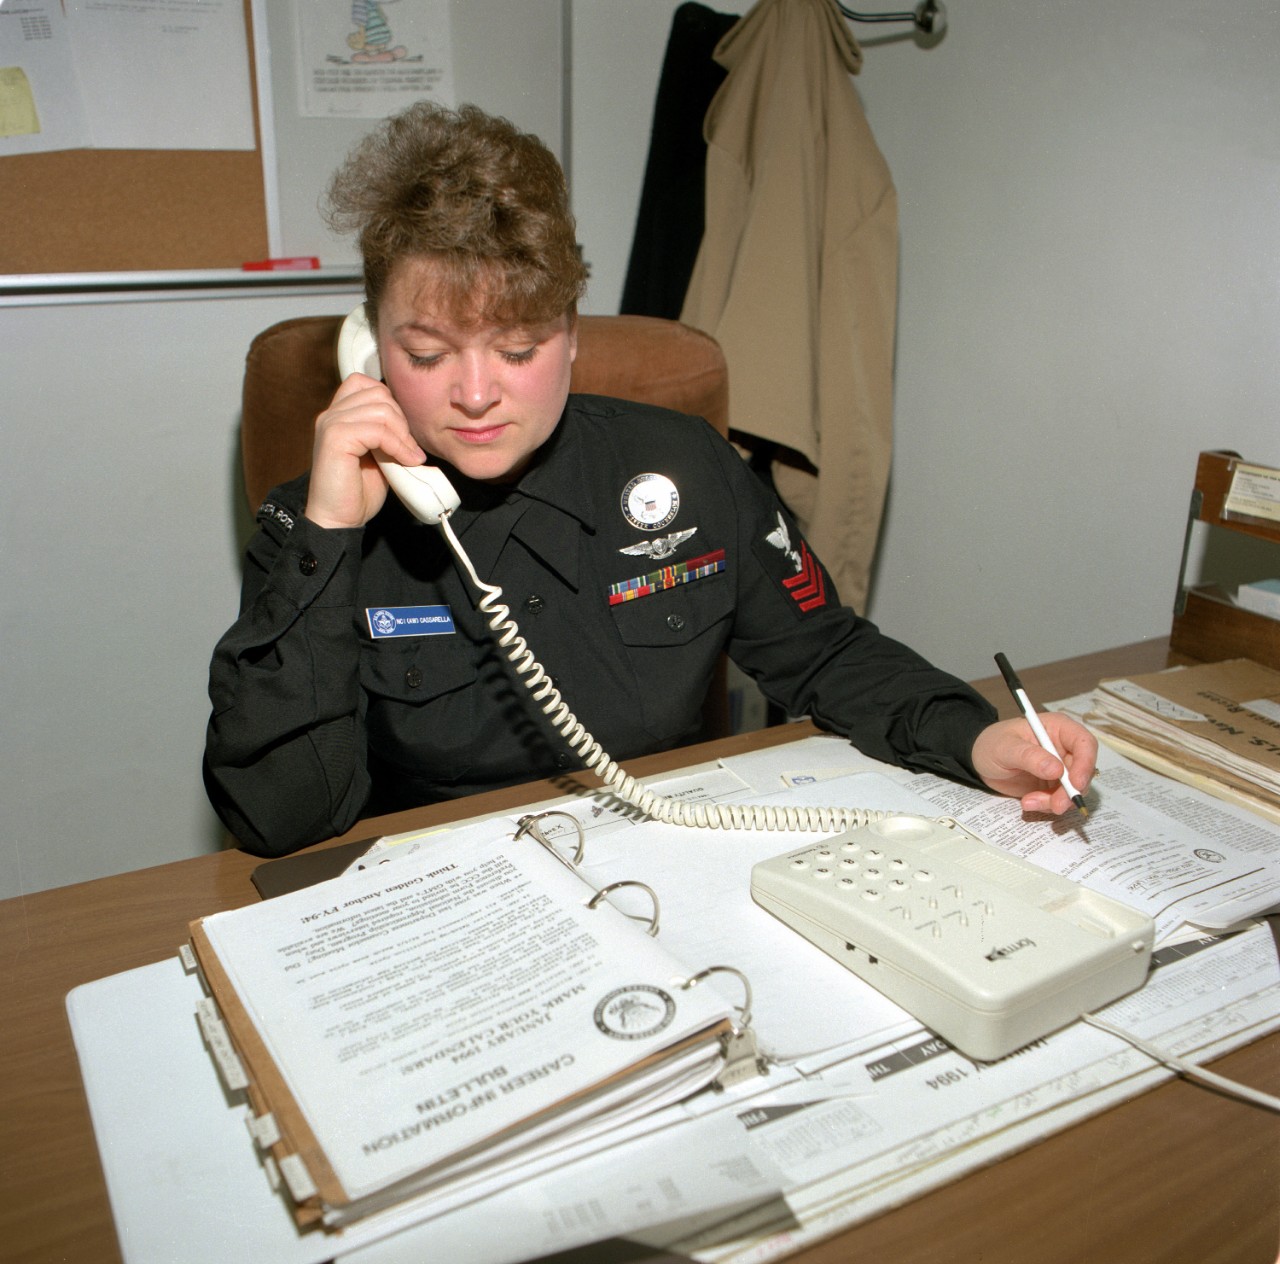 Navy Counselor First Class (NC1) Cheryl Ann Cassarella is shown working at her desk at Naval Station Rota where she is the command career counselor. Petty Officer Cassarella has received orders to the nuclear-powered aircraft carrier USS Dwight D...